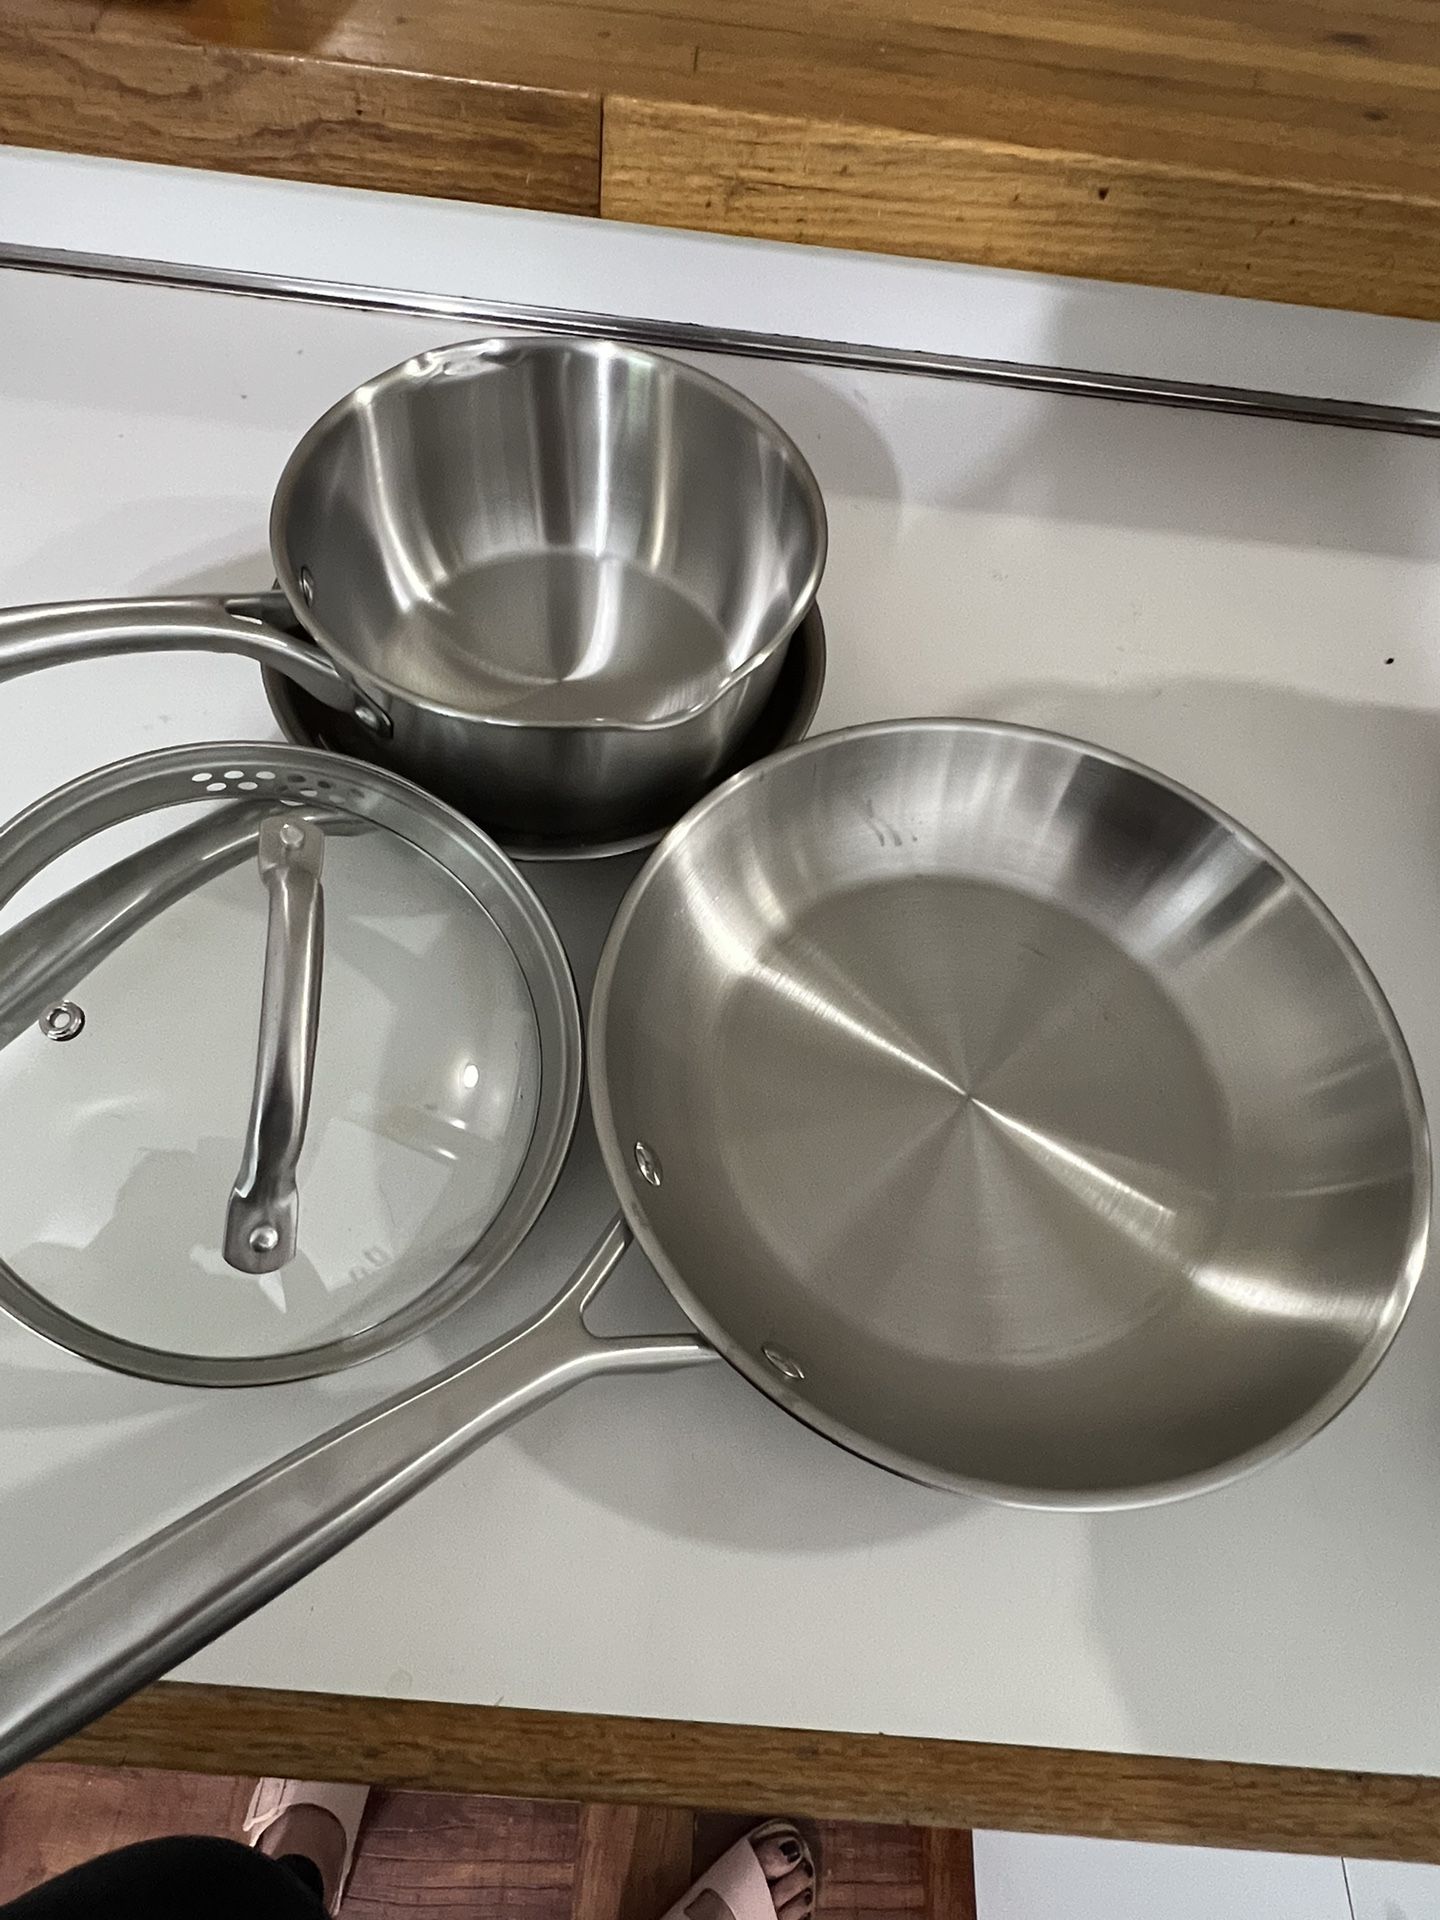 Green Life Pots & Pans Set with Utensils for Sale in Los Angeles, CA -  OfferUp